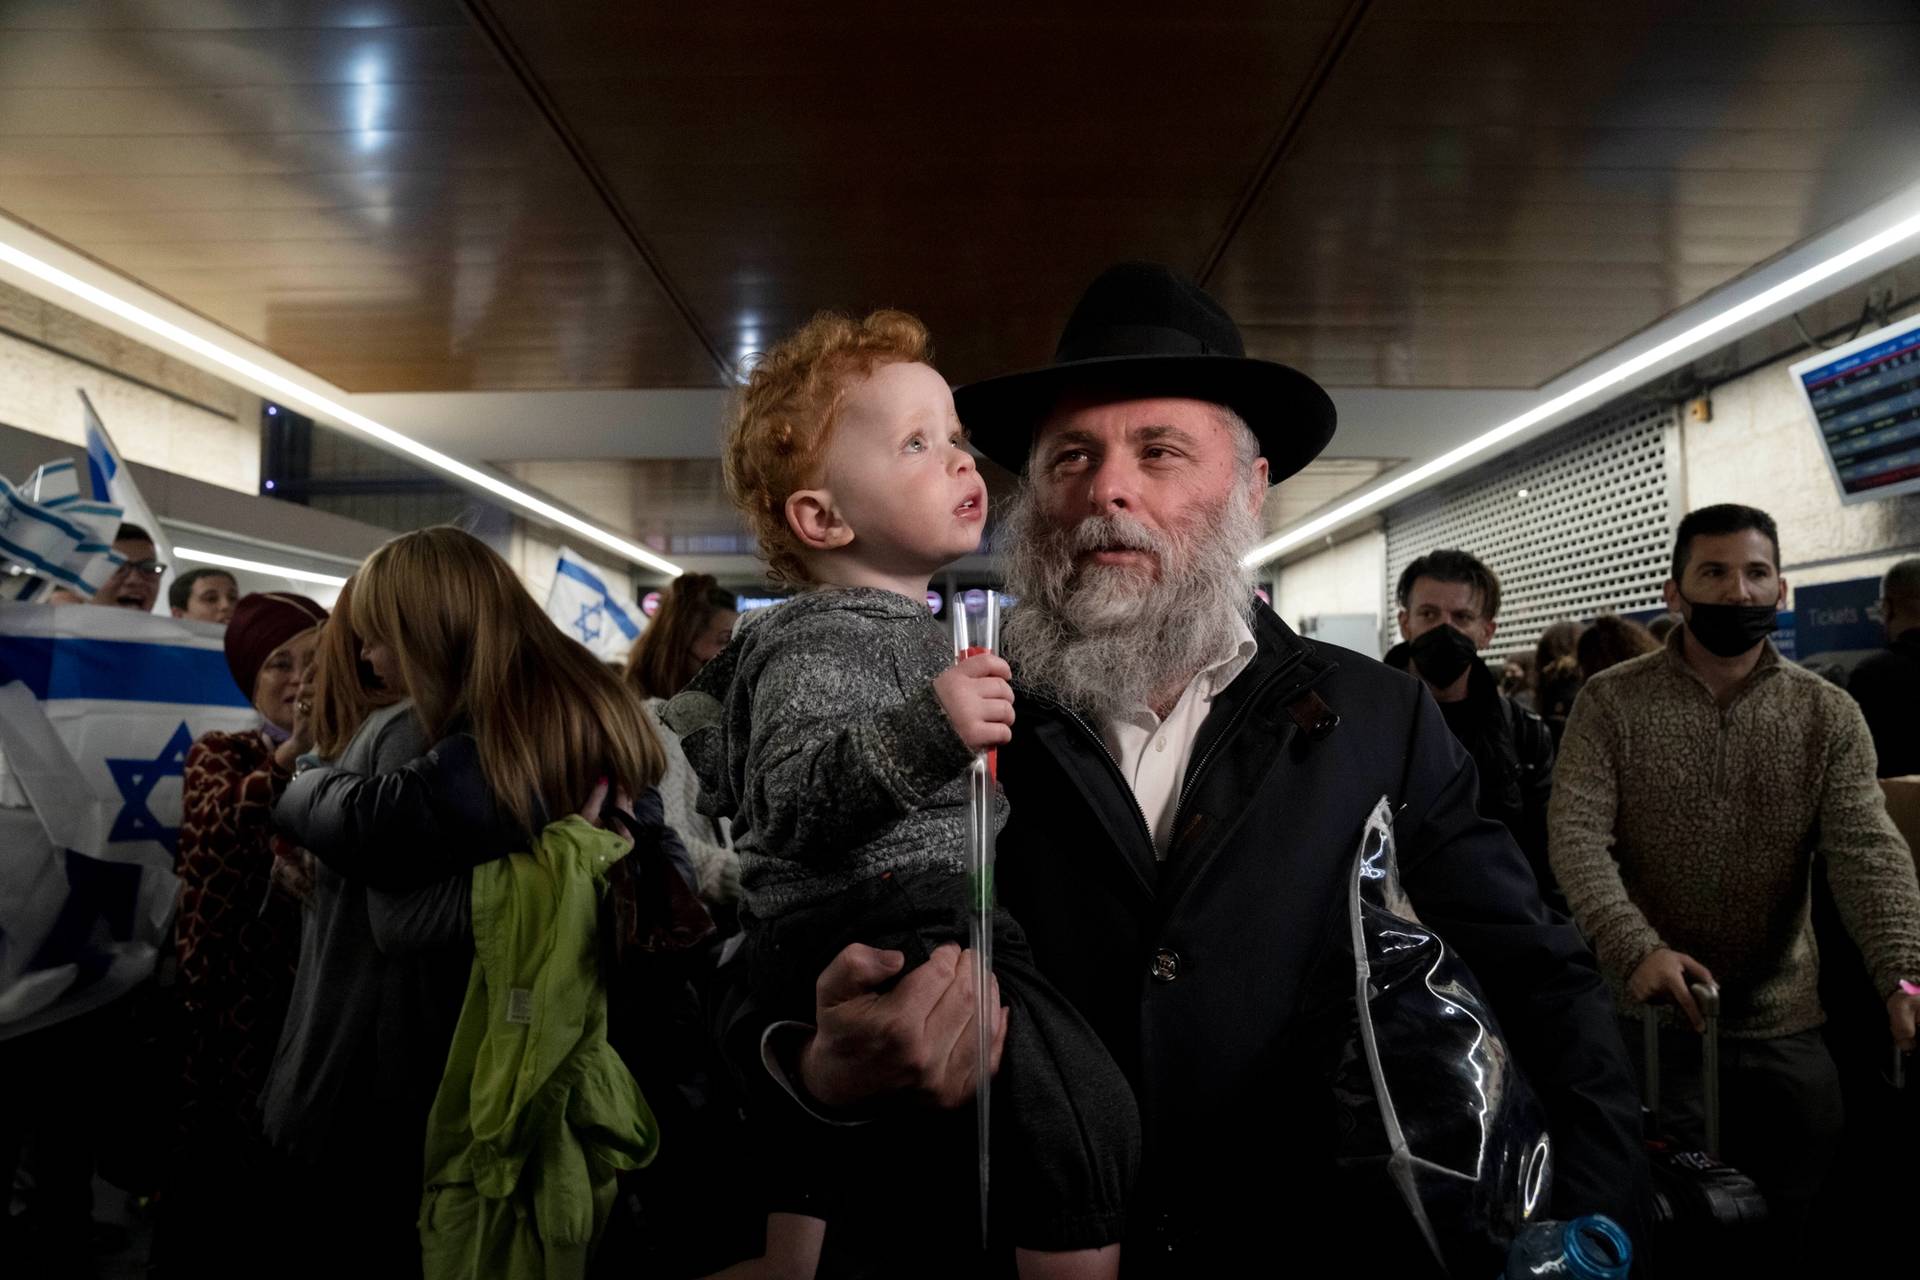 Chief rabbi of Kyiv, Yonatan Markovich, arrives at Ben-Gurion Airport with family from Ukraine on March 3, 2022. Some estimates say 10,000 Ukrainian Jews will come to Israel to escape the Russian invasion; others predict 10 times that.